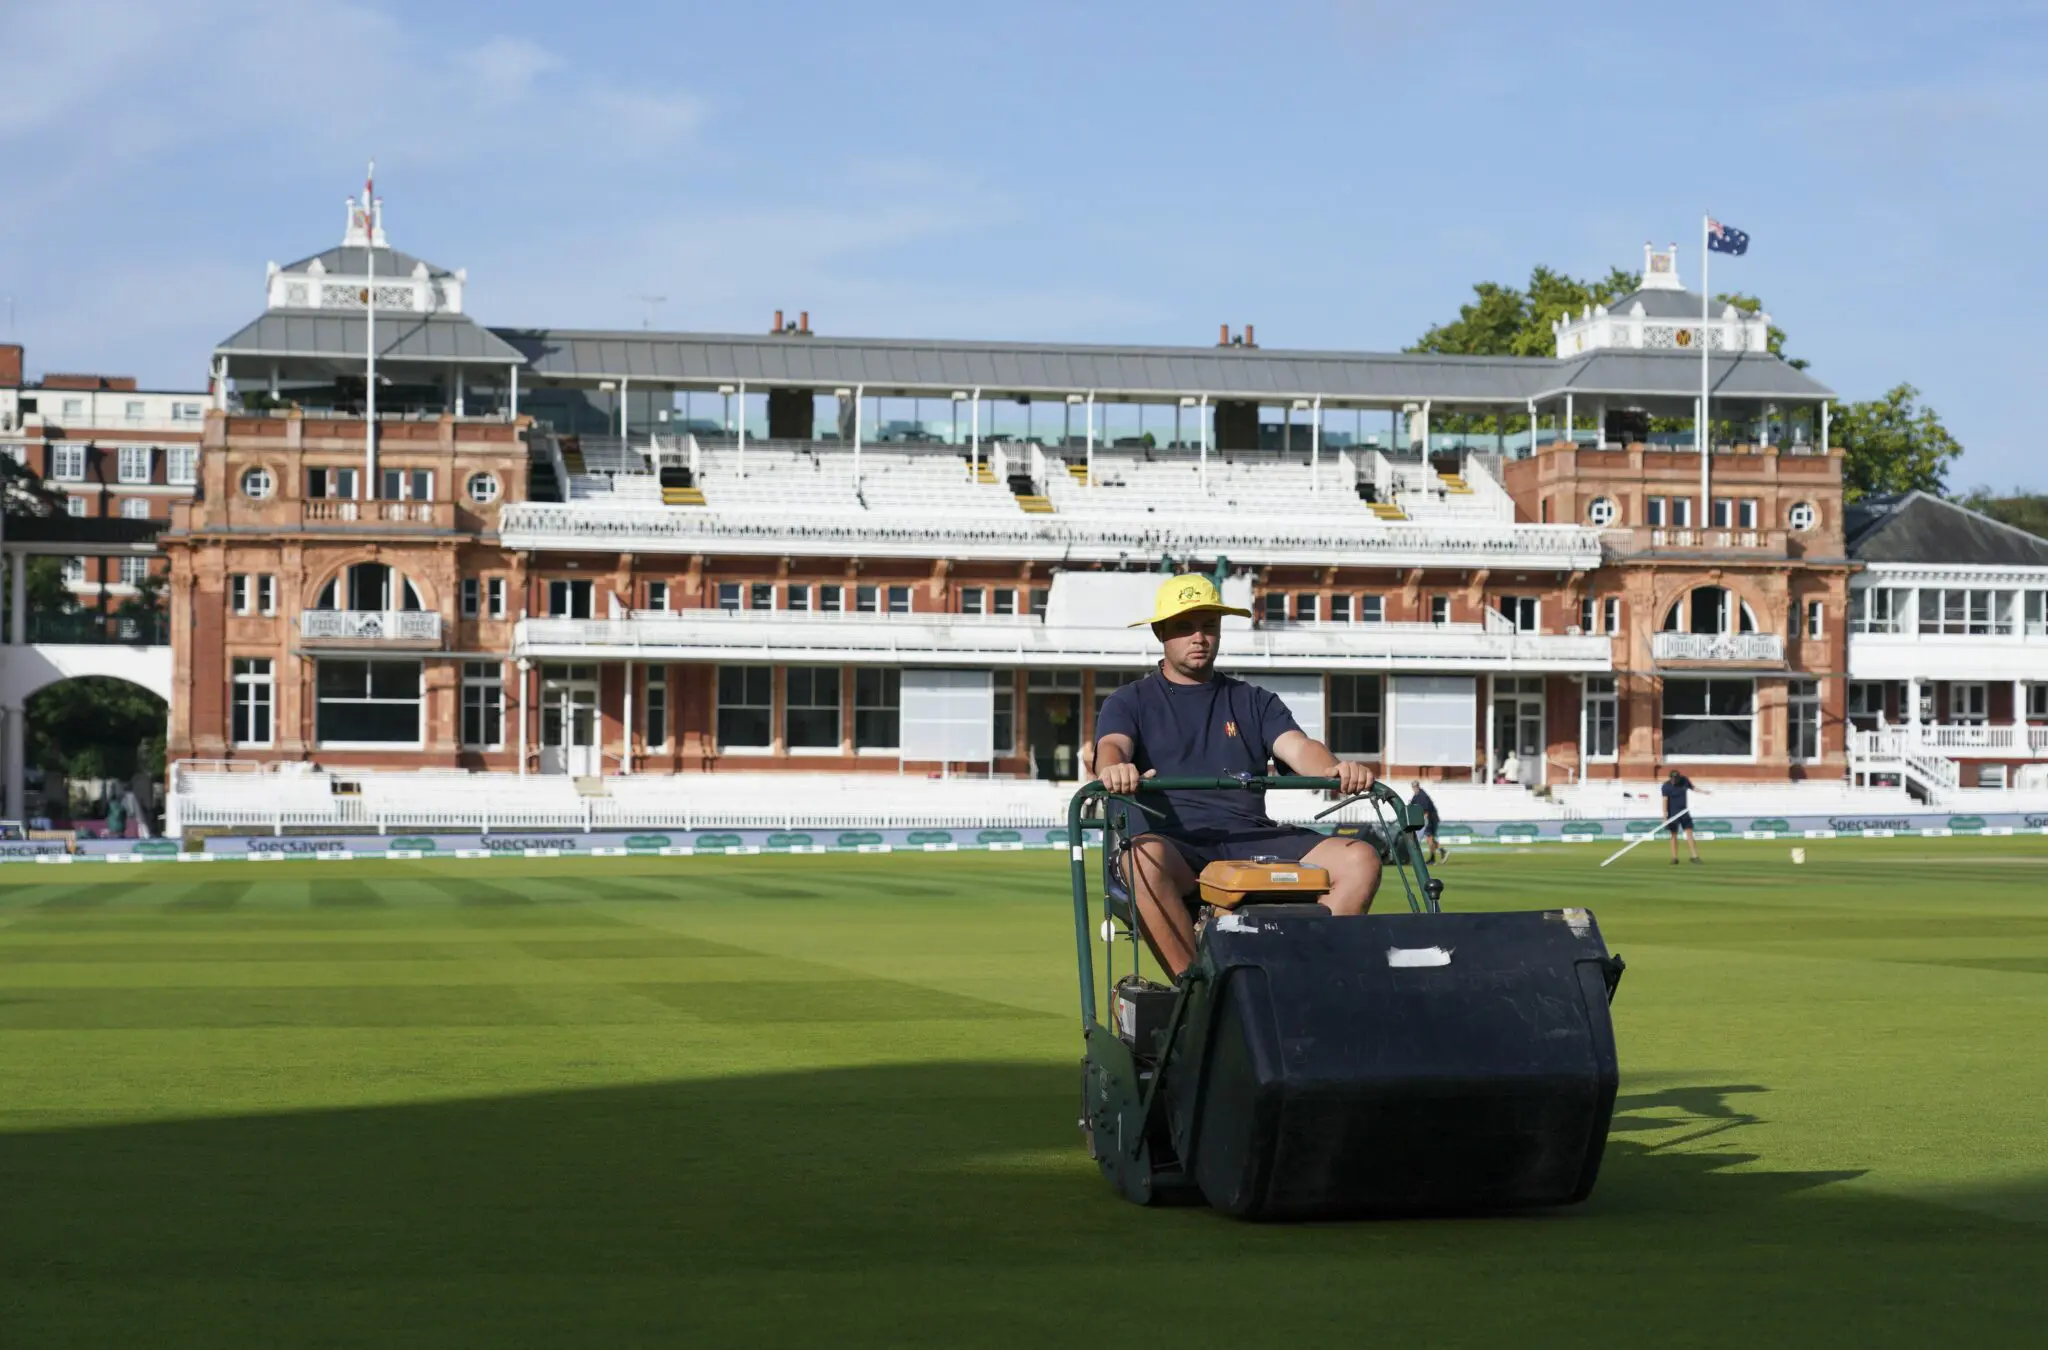 Gardener on the lawn on the Cricket ground